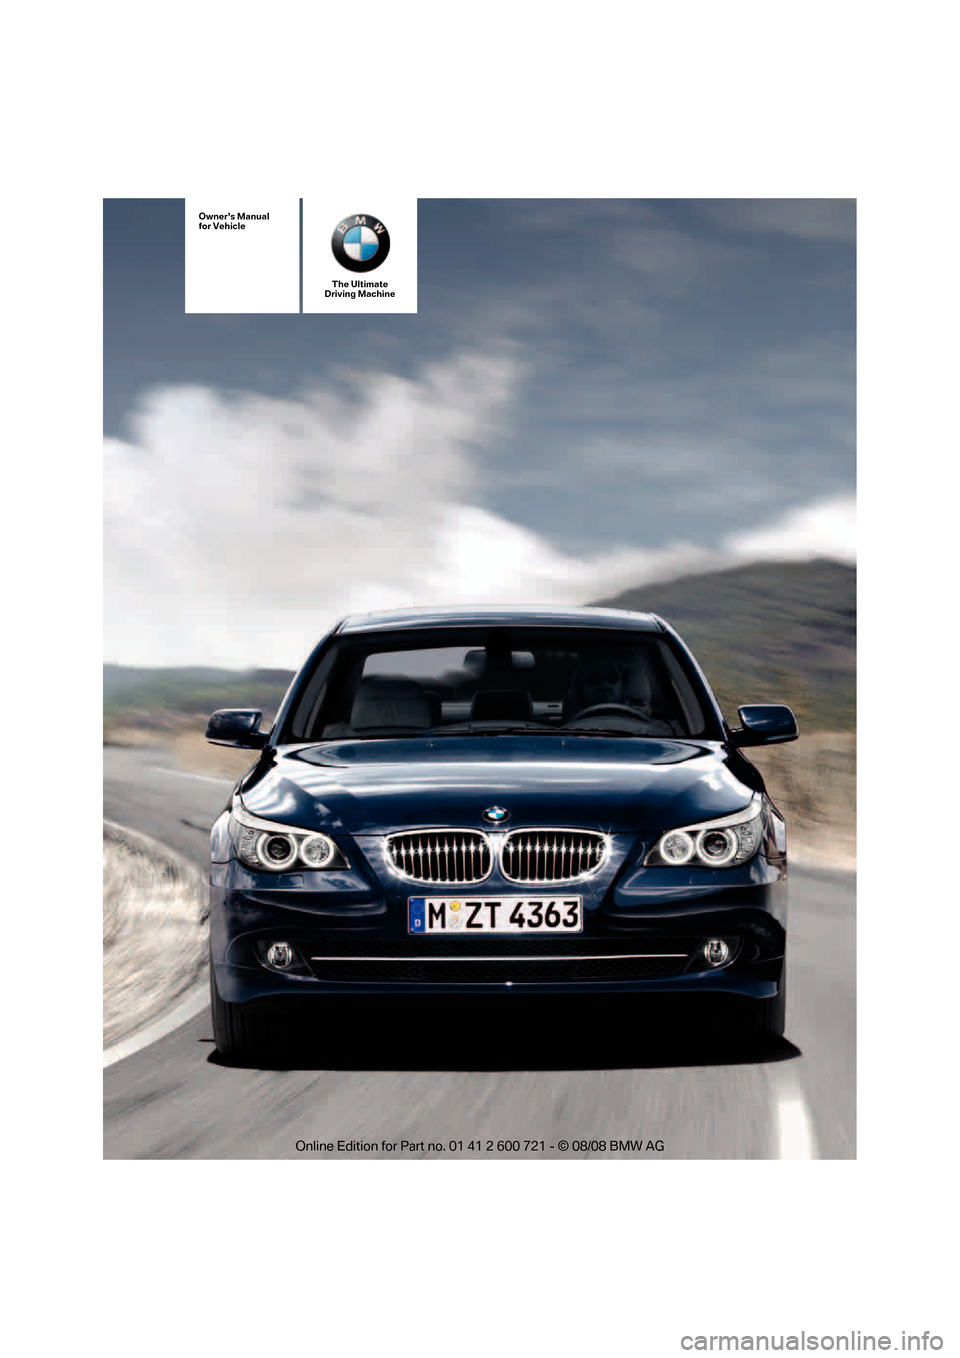 BMW 525XI TOURING 2009 E61 Owners Manual The Ultimate
Driving Machine
Owners Manual
for Vehicle 